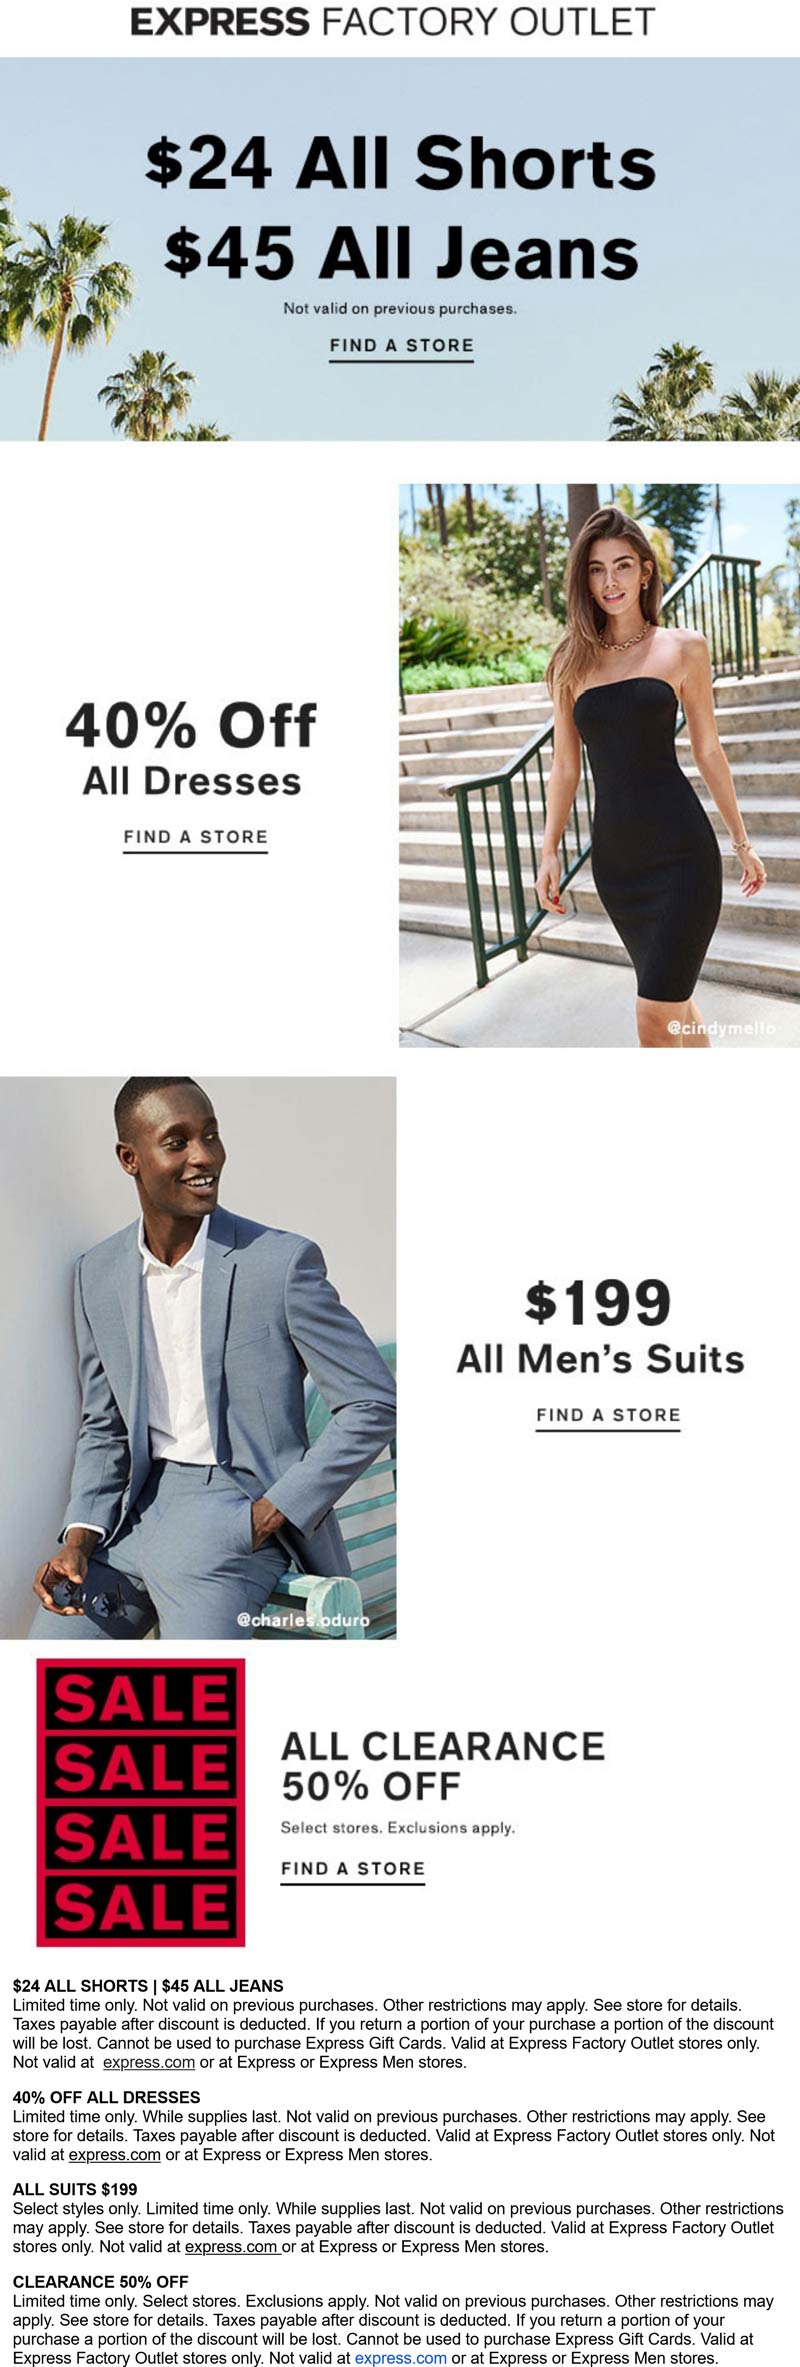 Express Factory Outlet coupons & promo code for [November 2022]